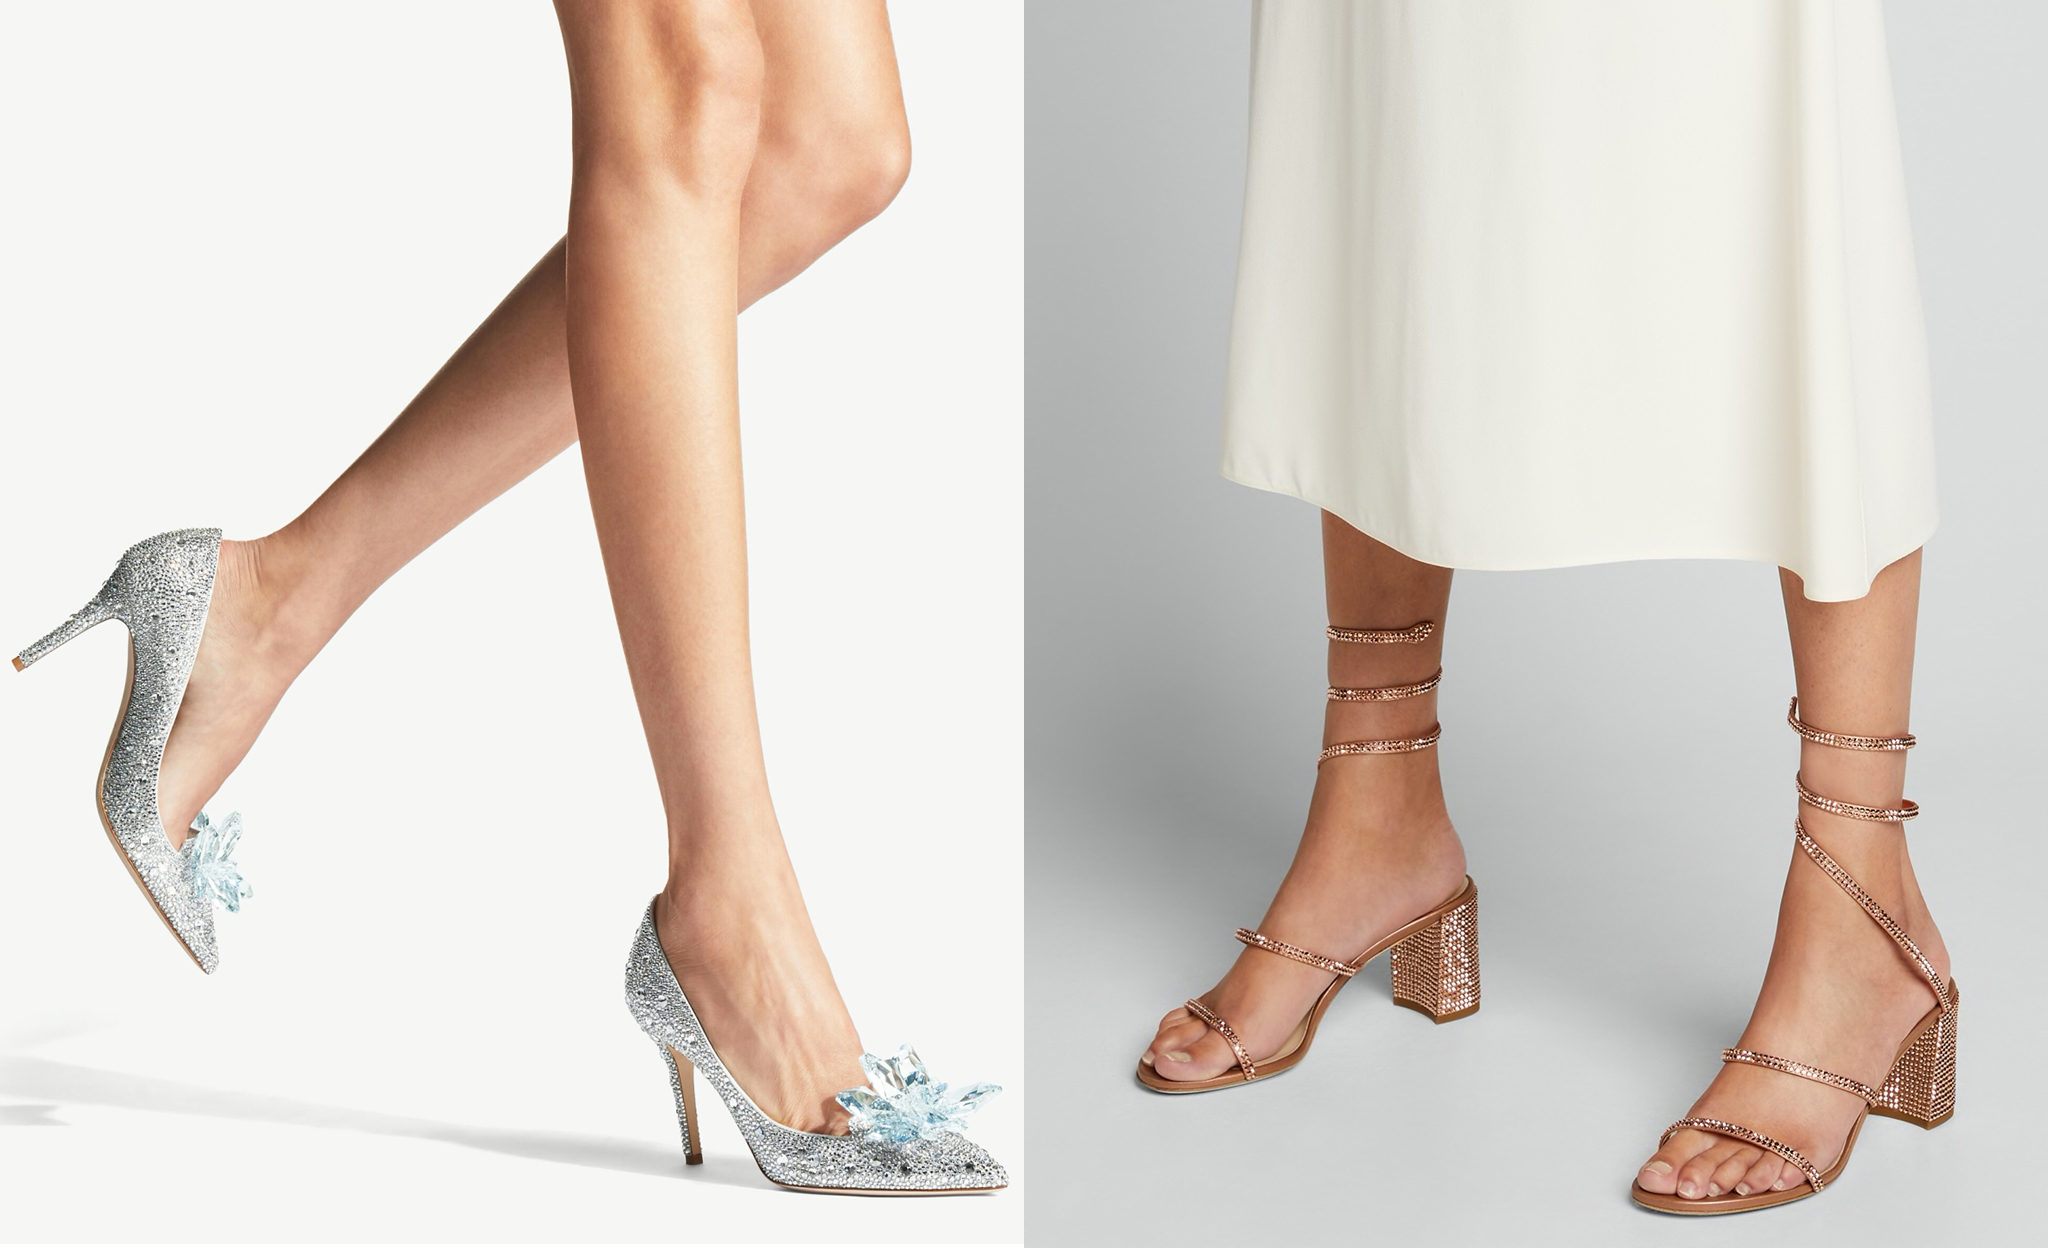 Crystal pumps and sandals from Rene Caovilla and Jimmy Choo